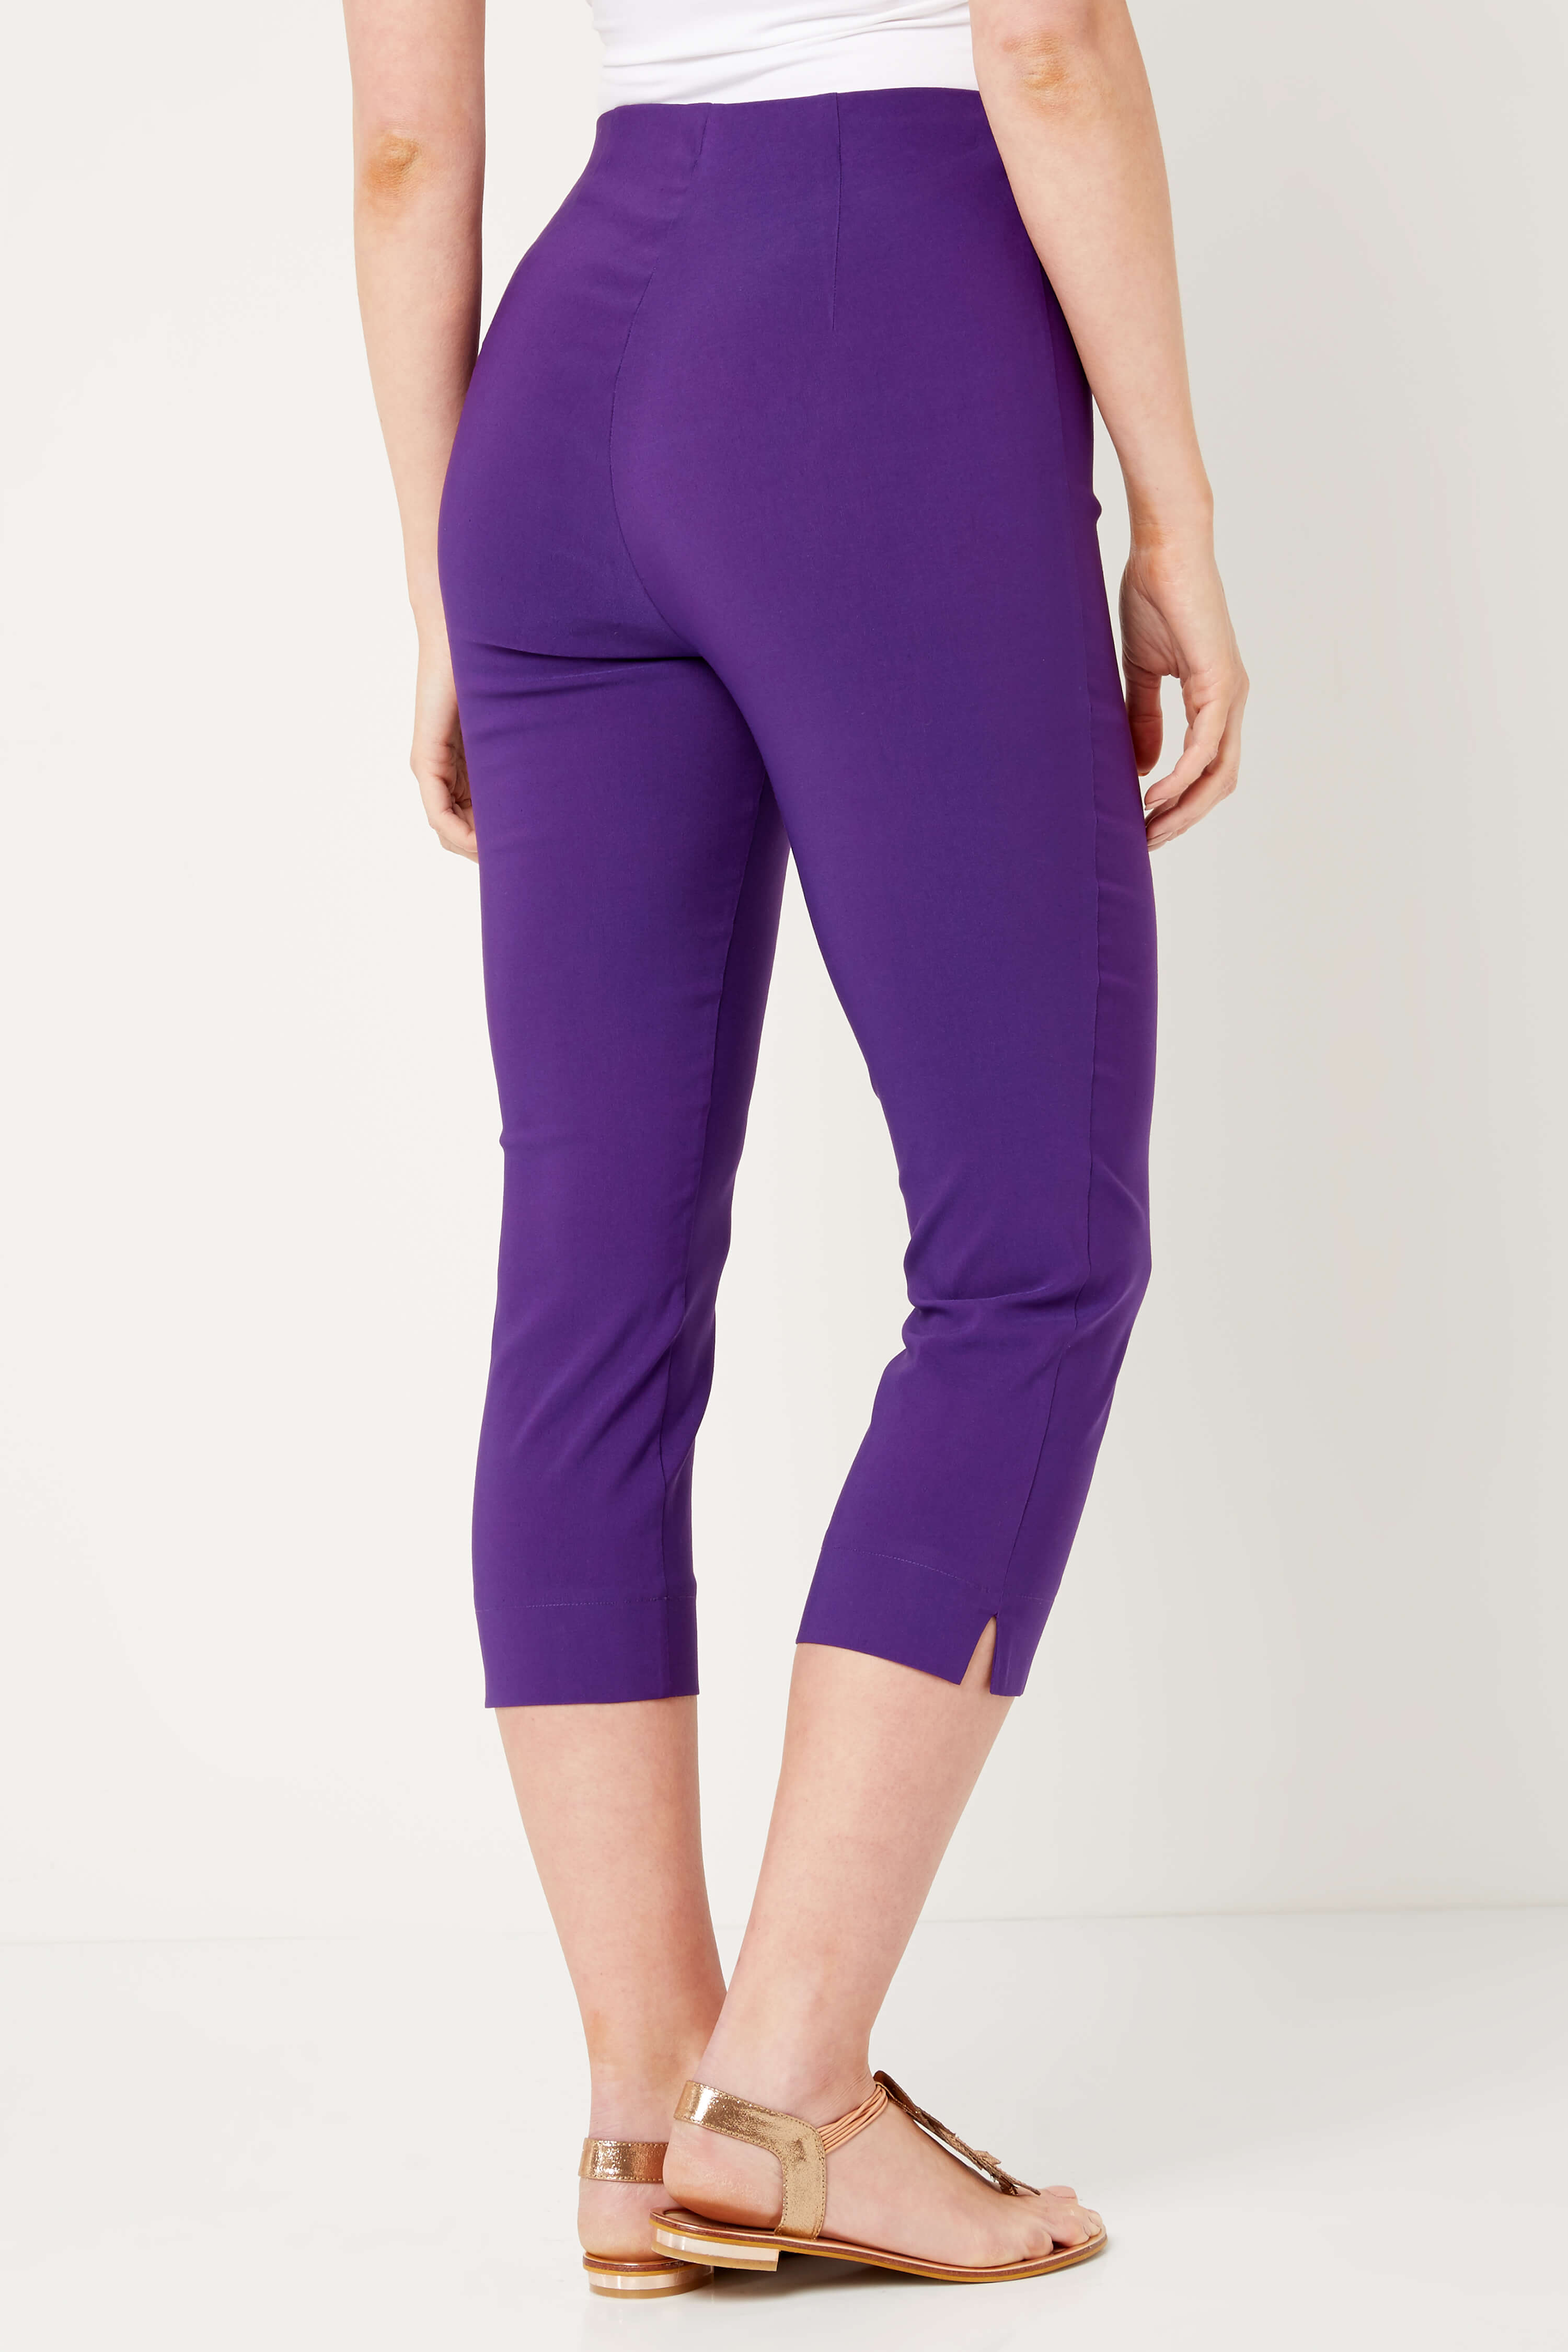 Purple Cropped Stretch Trouser, Image 2 of 4